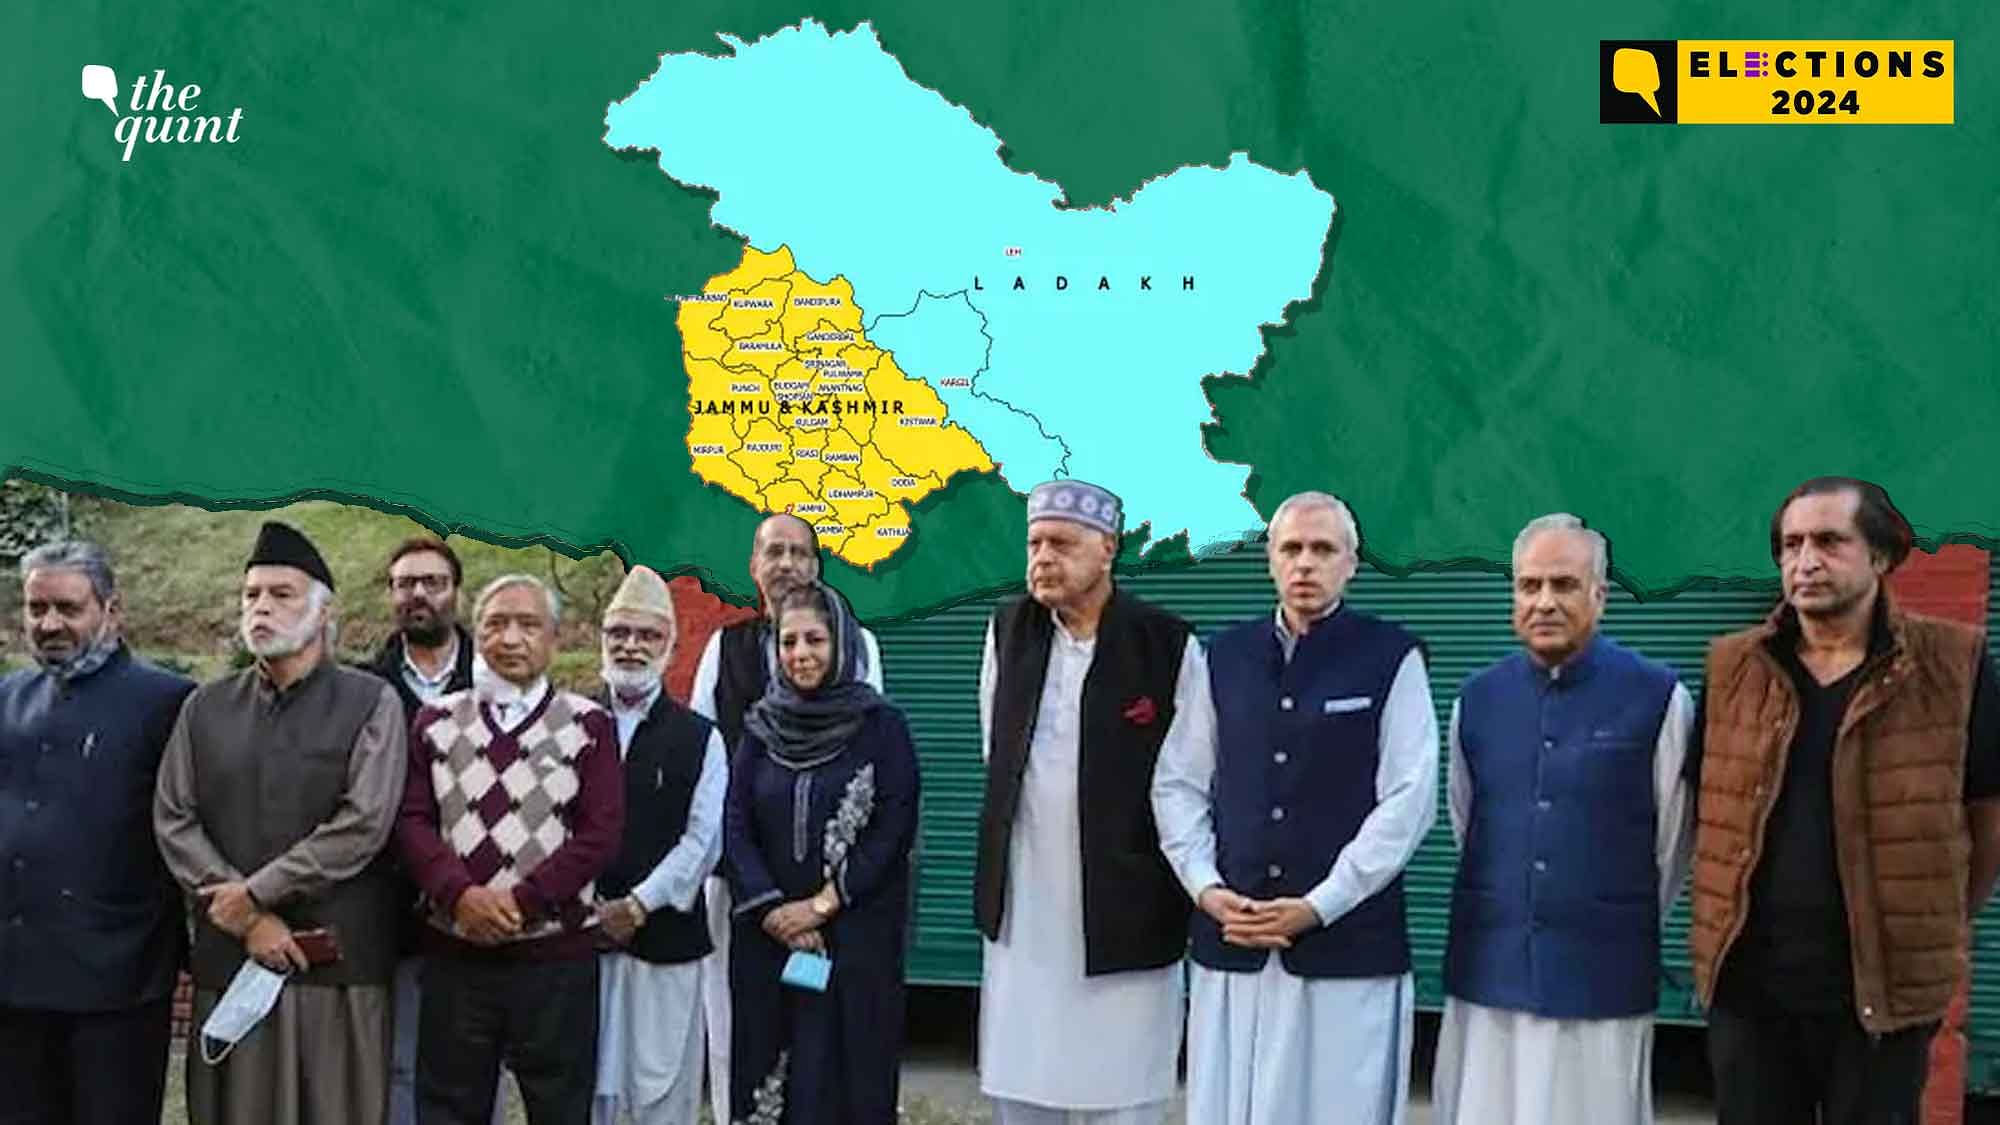 <div class="paragraphs"><p>As the J&amp;K enters election season, its political landscape in the region is marred by far too many dissensions. Political pundits suggest that while this situation was complex, it was not entirely unpredictable.</p></div>